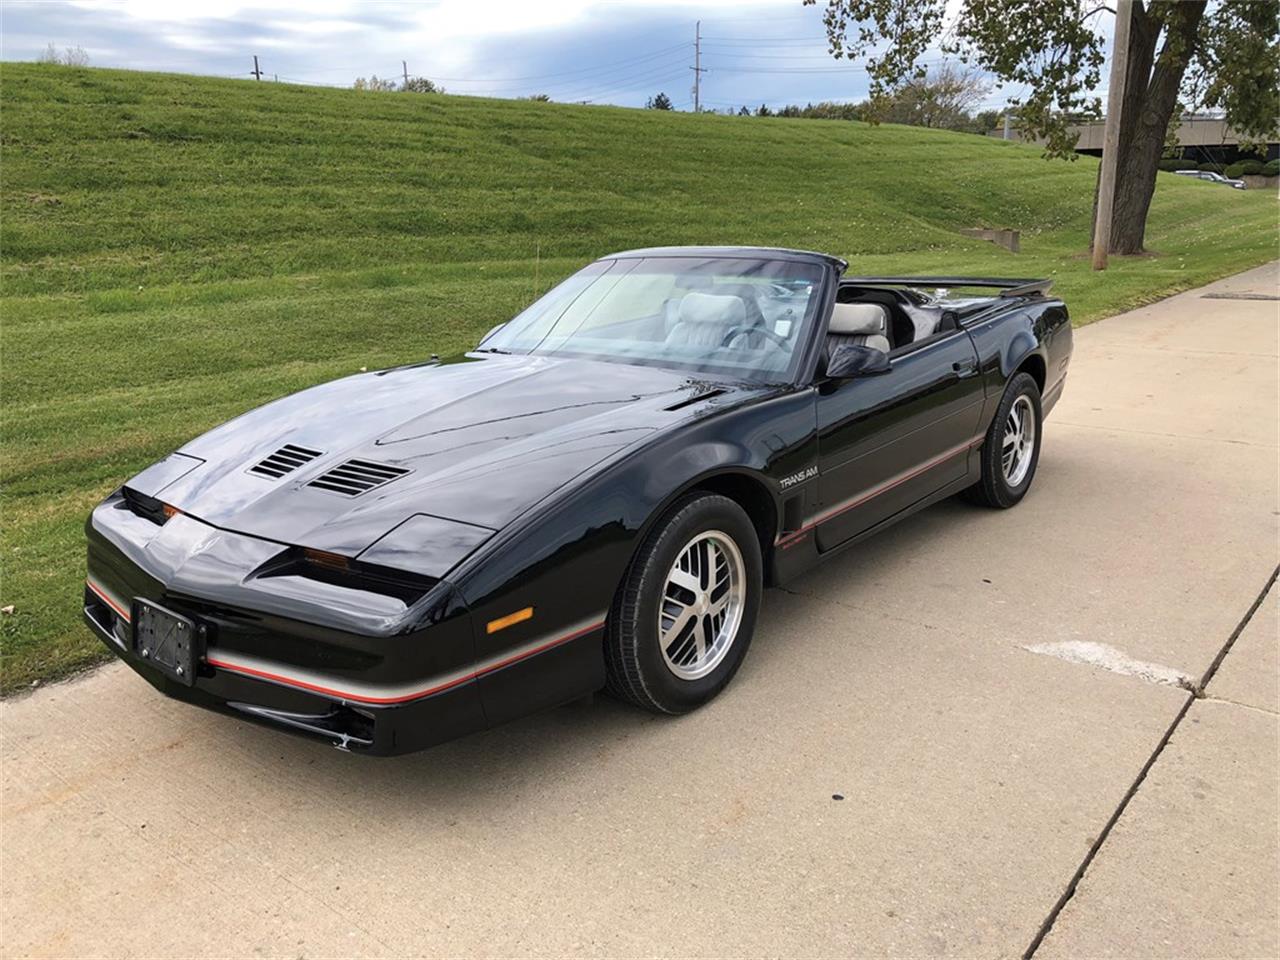 For Sale at Auction: 1986 Pontiac Firebird Trans Am for sale in Auburn, IN